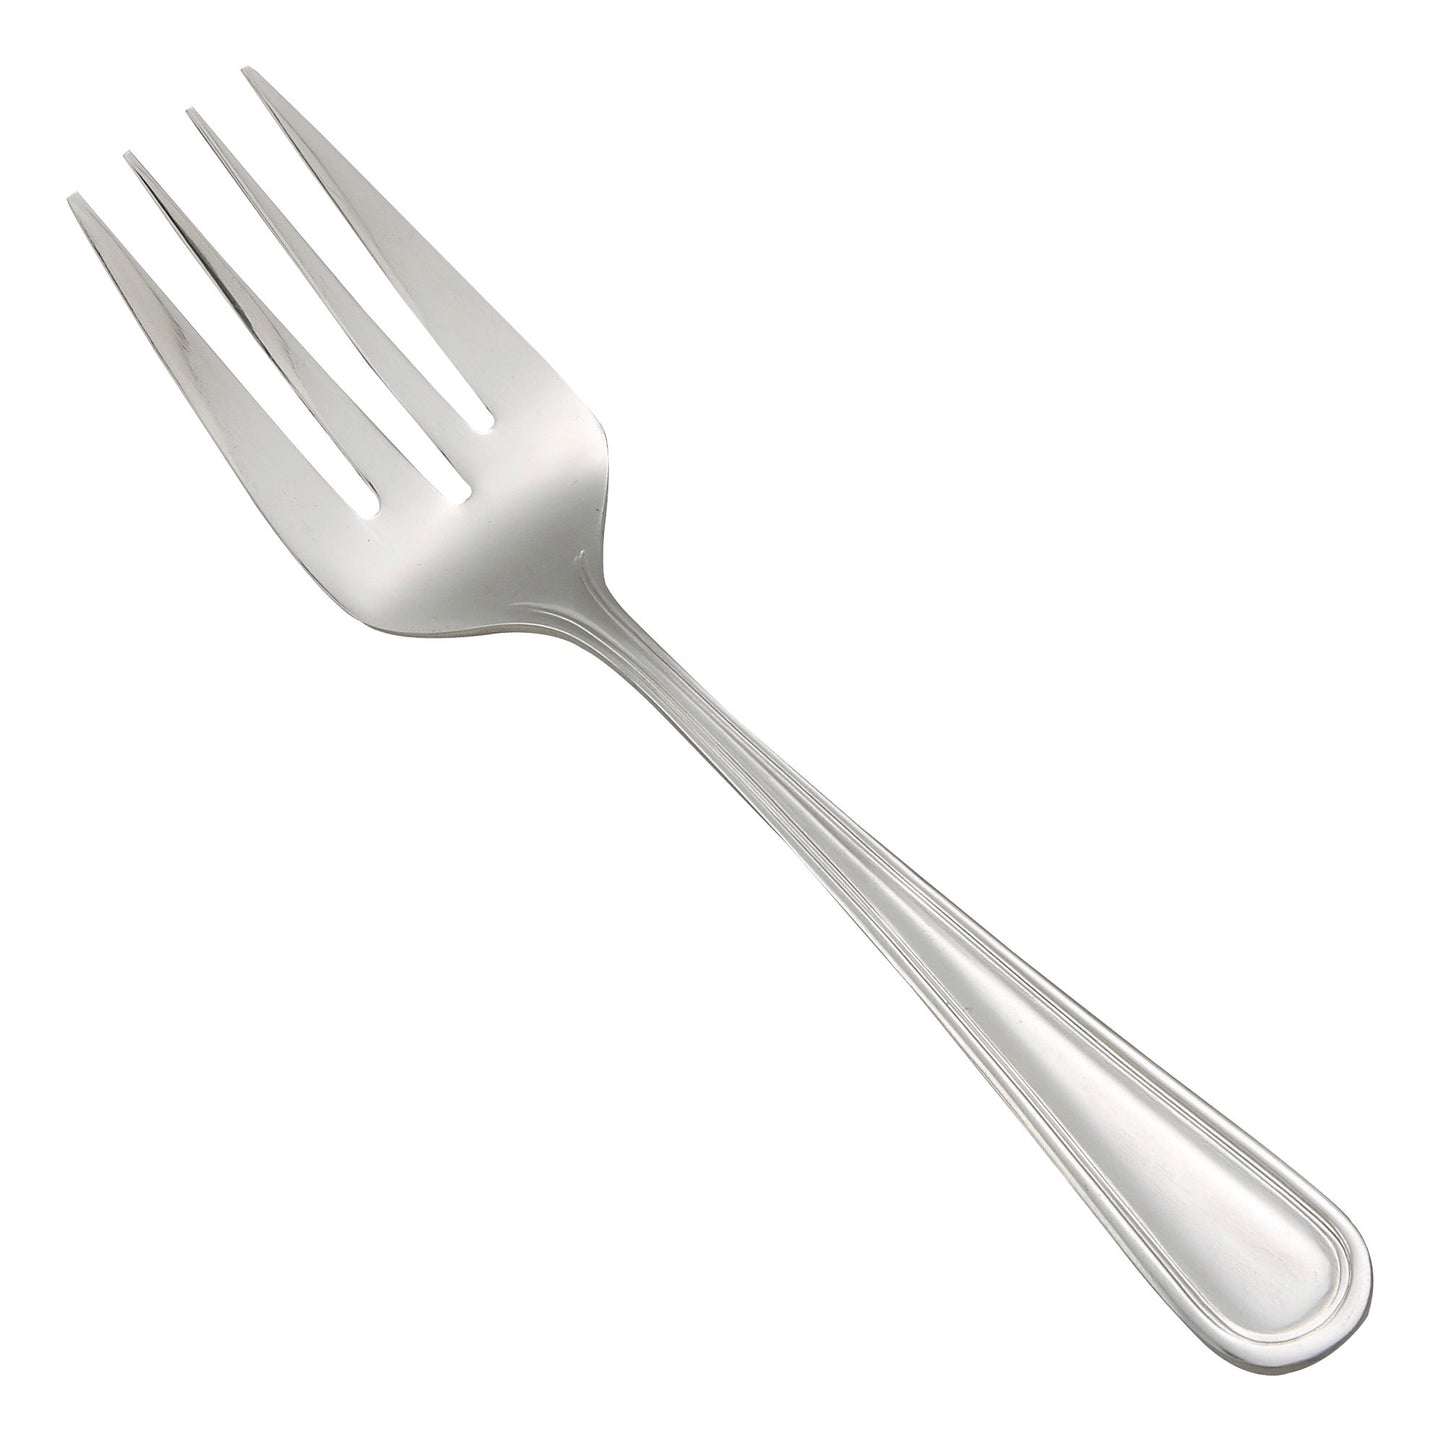 0030-22 - Shangarila Cold Meat Fork, 18/8 Extra Heavyweight